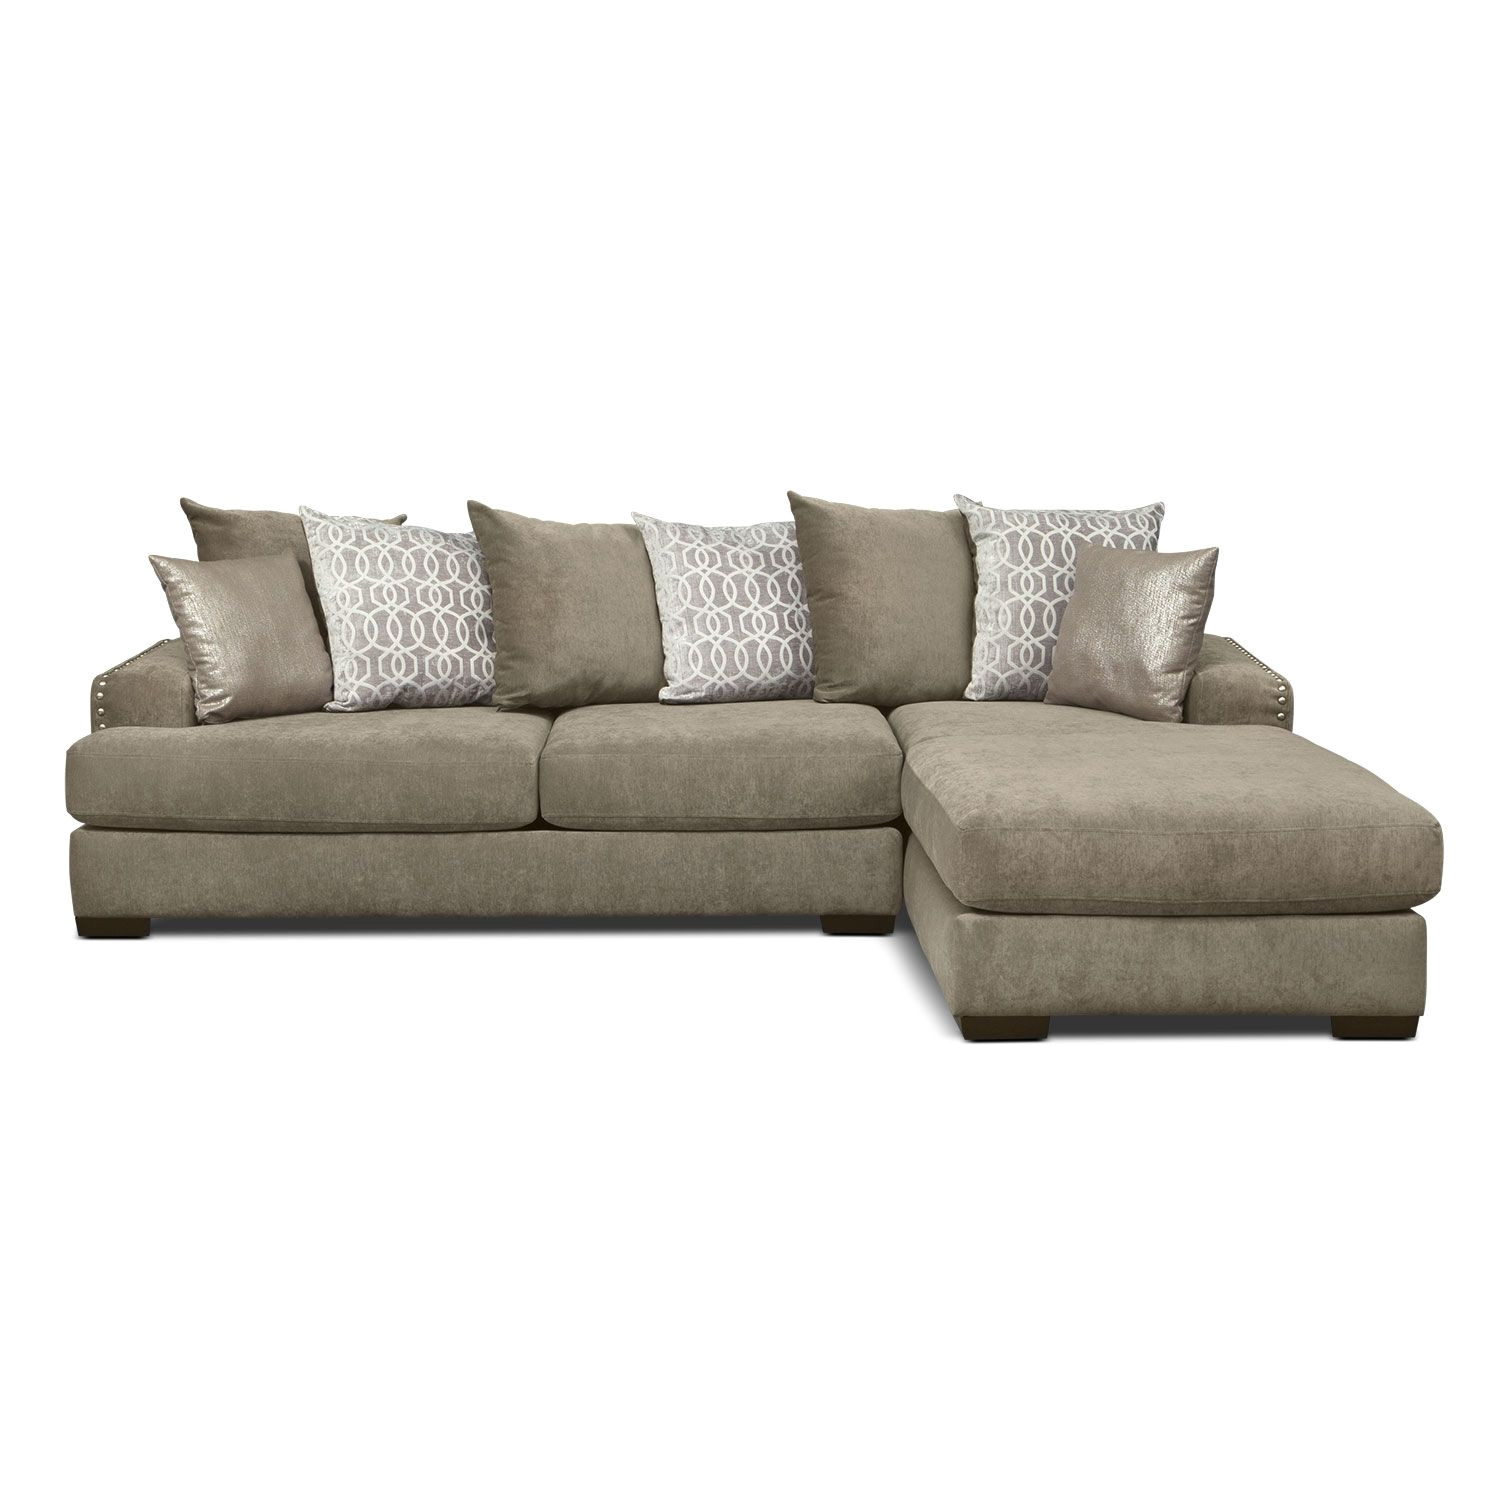 1000 tempo 2 pc sectional with right facing chaise value city furniture